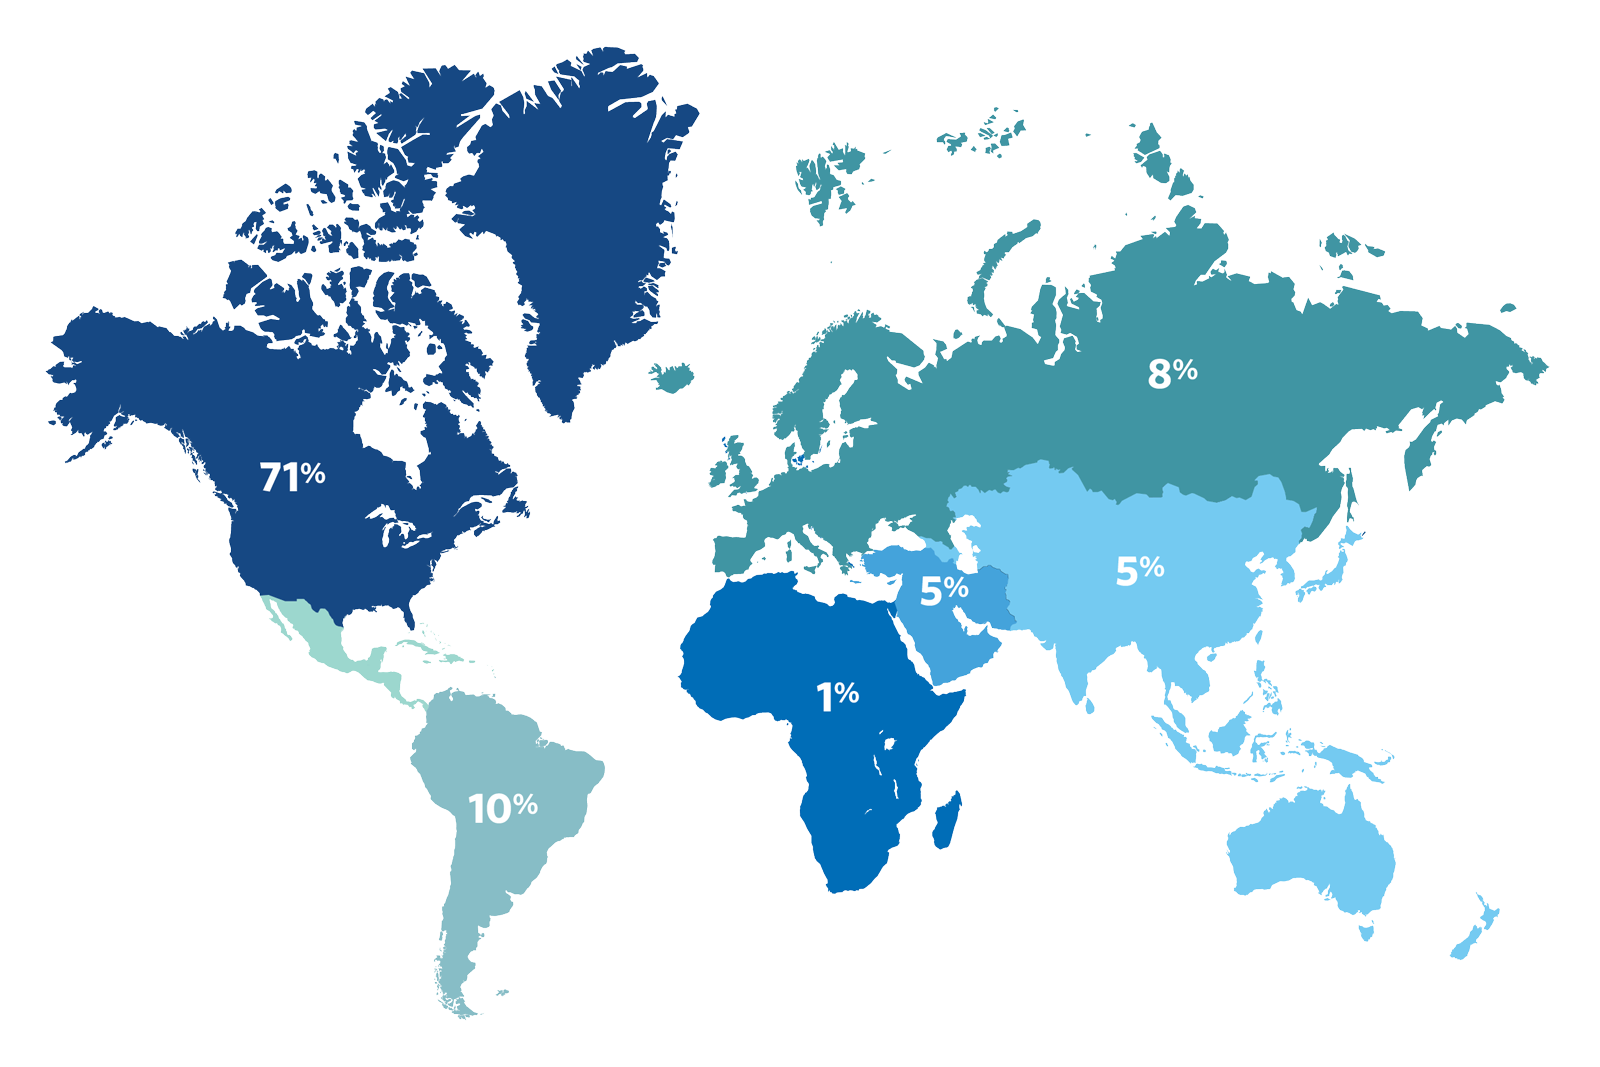 Pricing Strategies participants by region